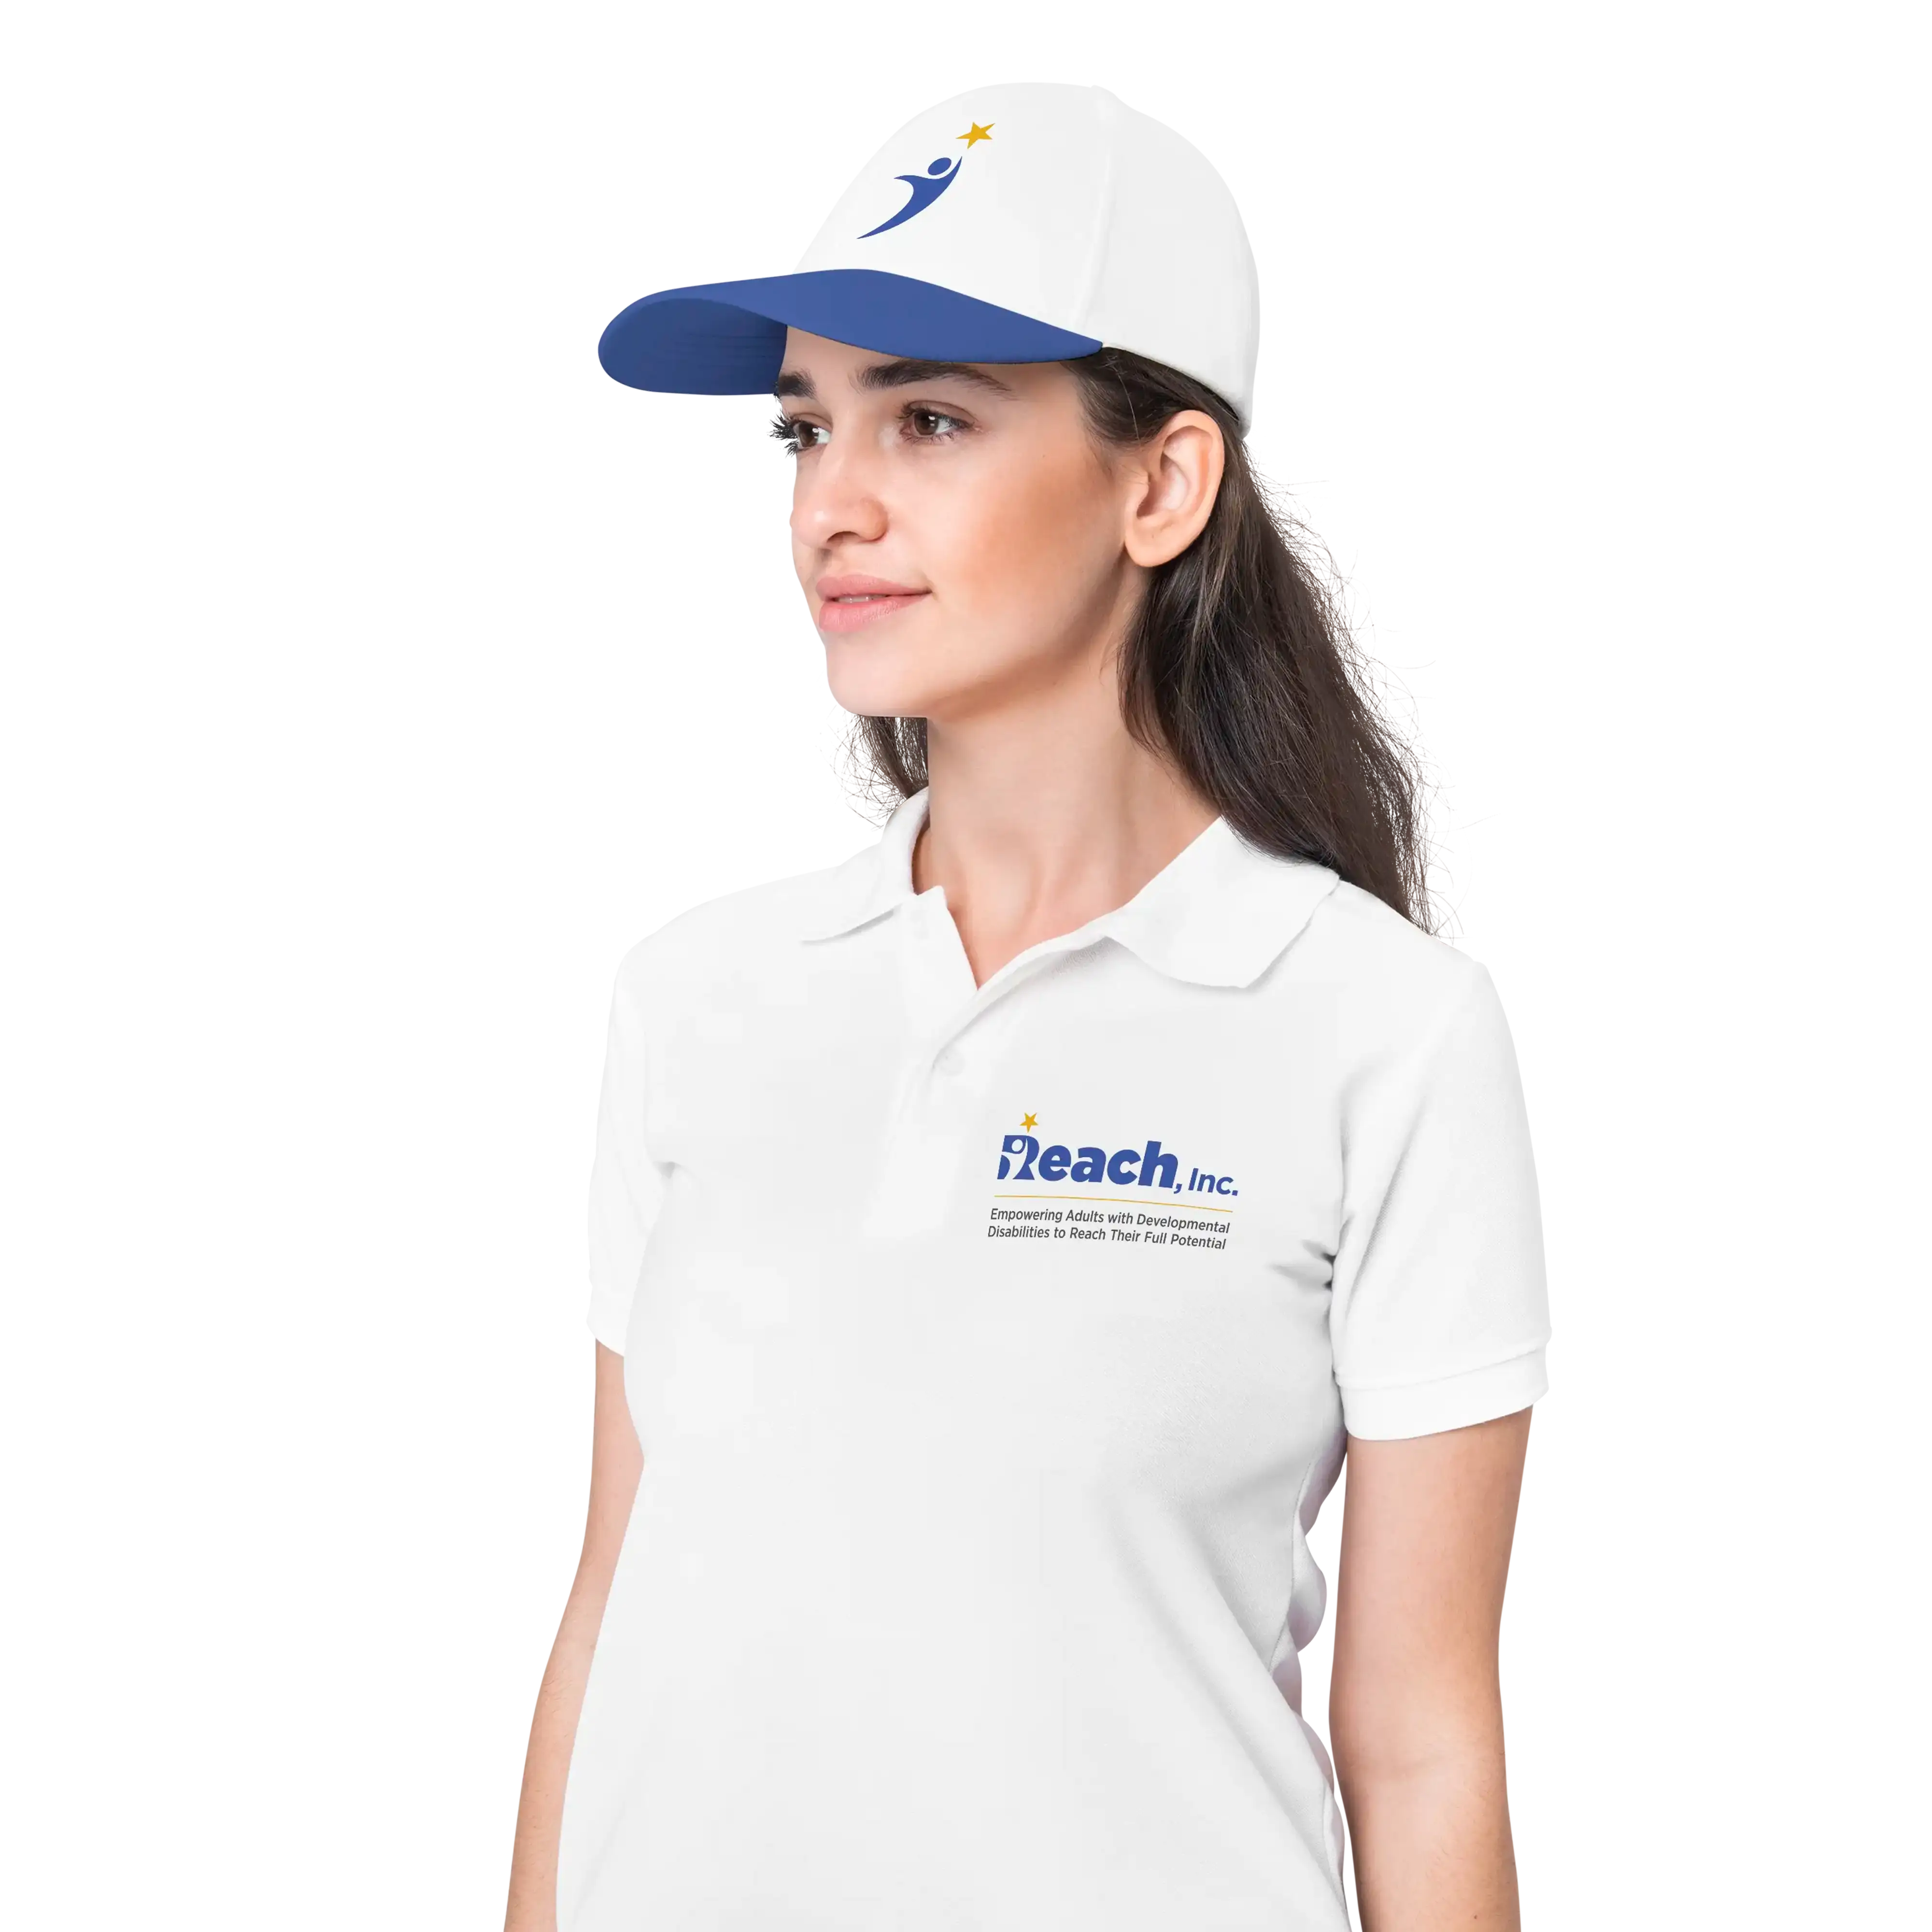 Woman wearing Reach hat and shirt